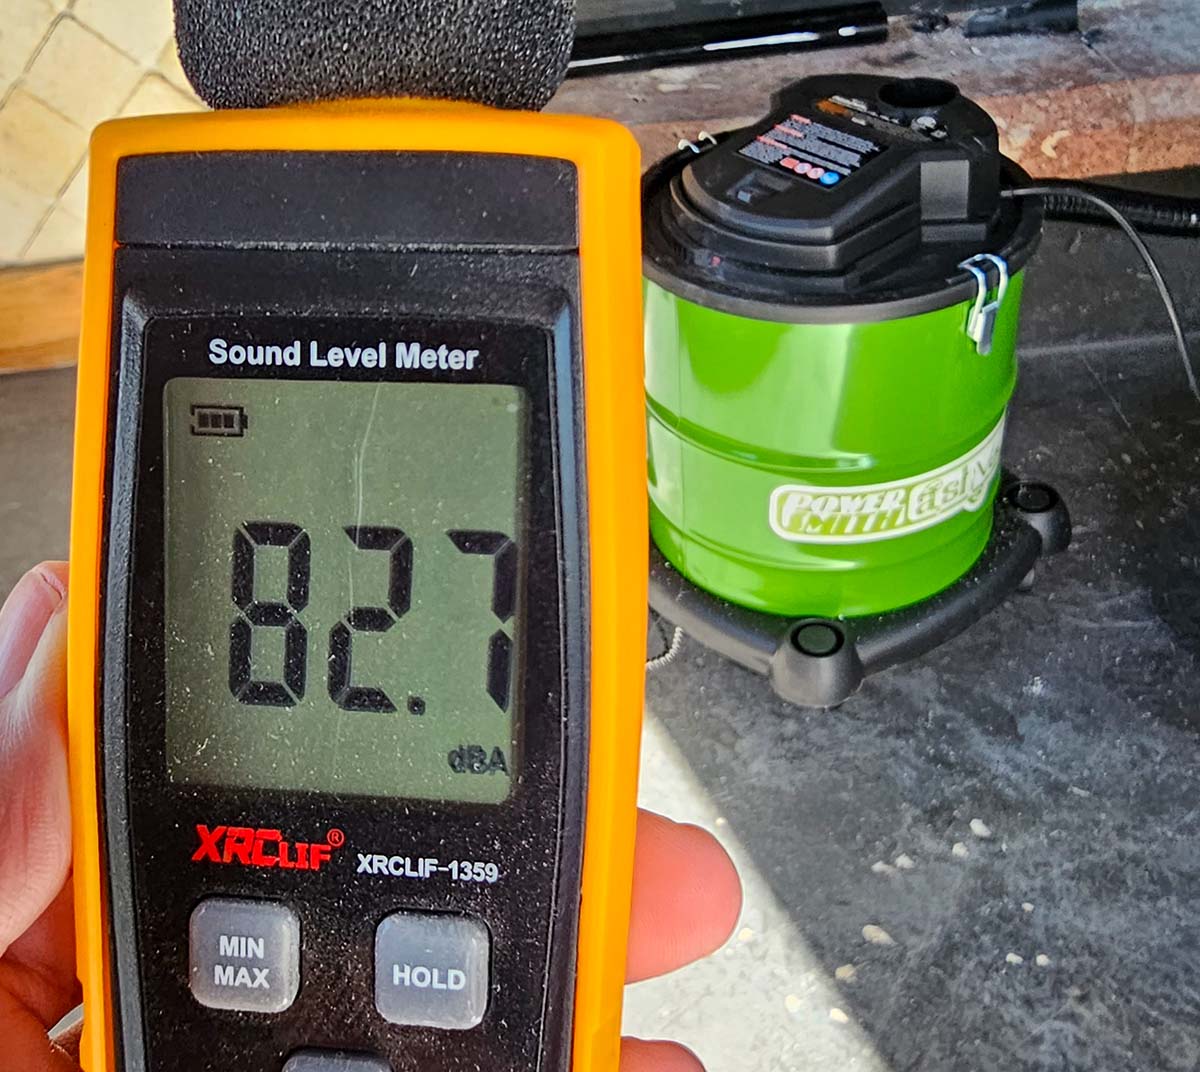 A decibel meter showing a reading of 82.7 with the PowerSmith ash vacuum in the background.